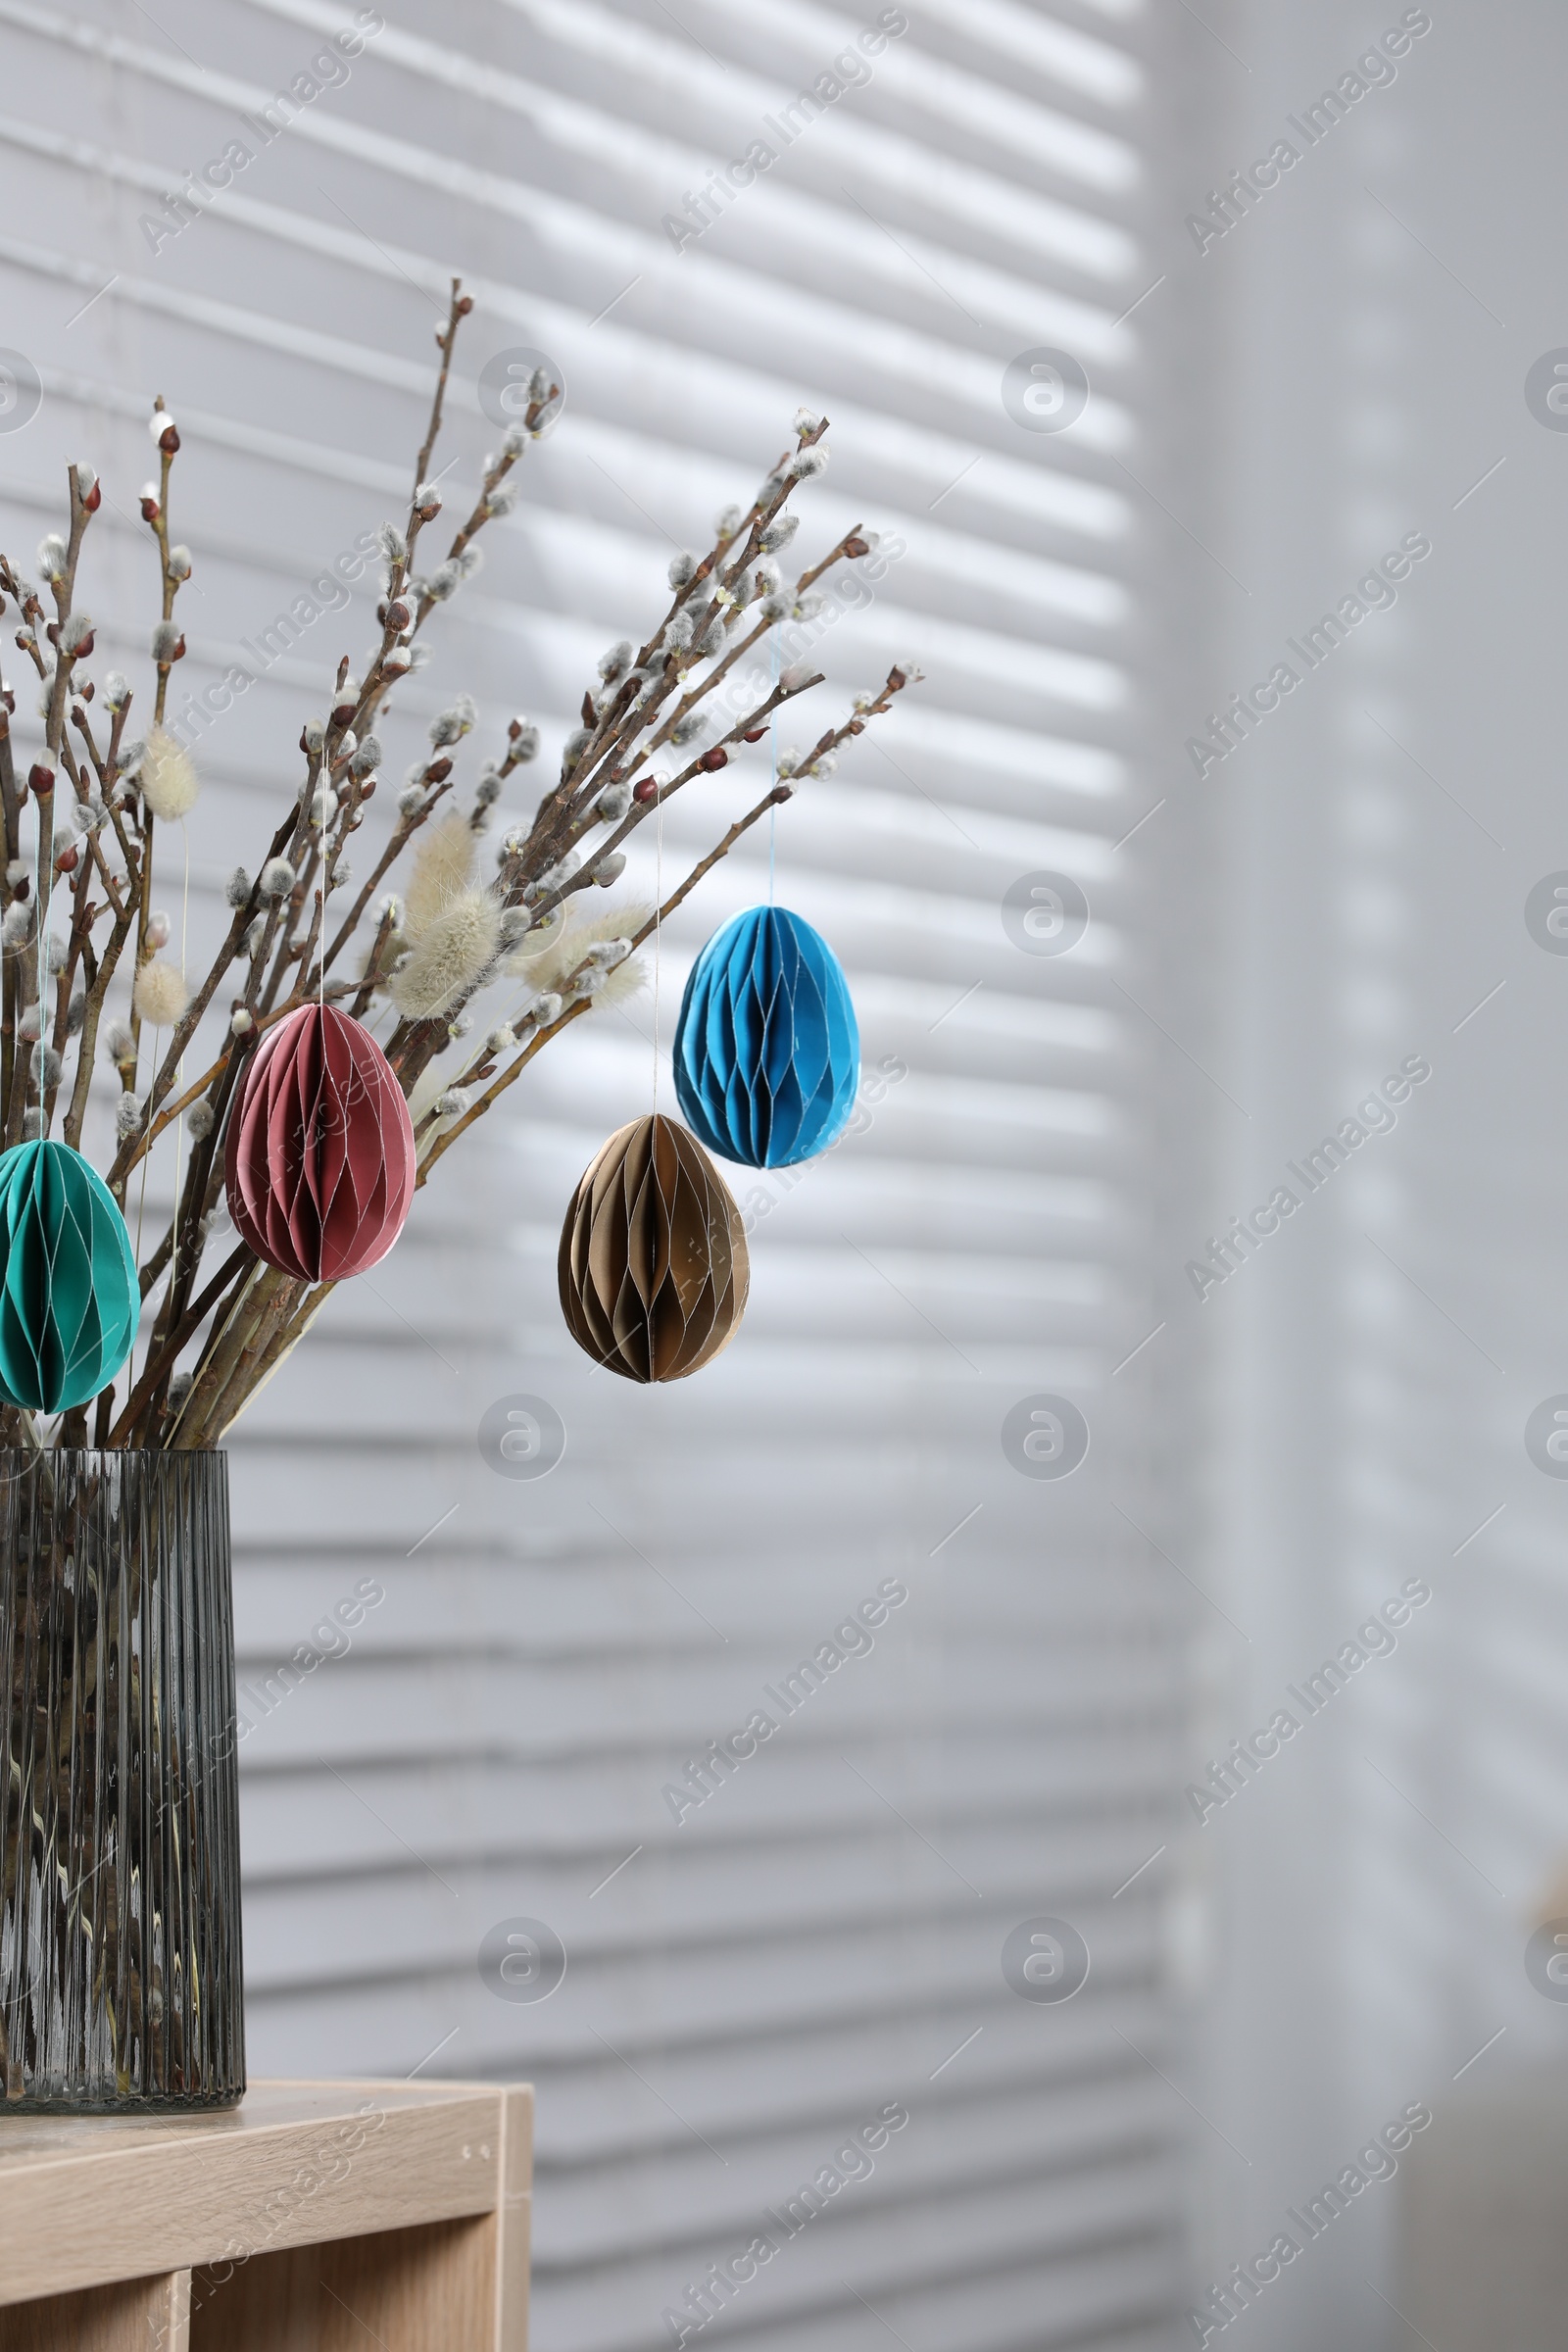 Photo of Beautiful pussy willow branches with paper eggs in vase on shelving unit at home, space for text. Easter decor